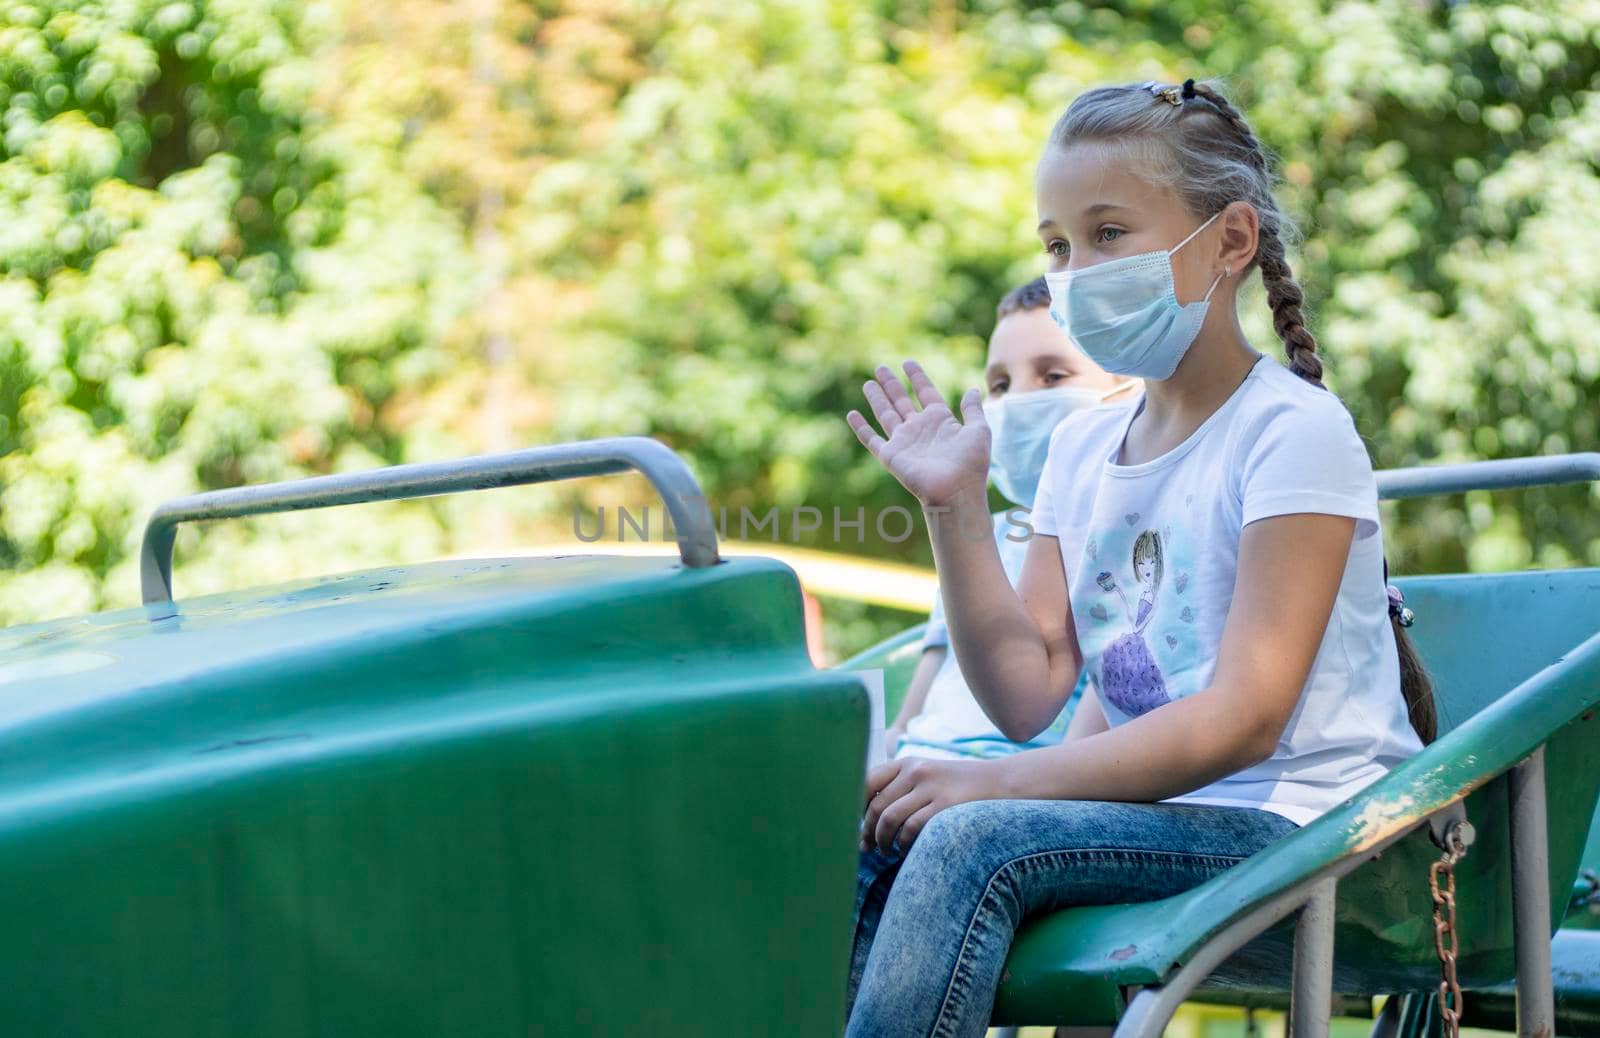 children in medical masks ride the attraction by zokov